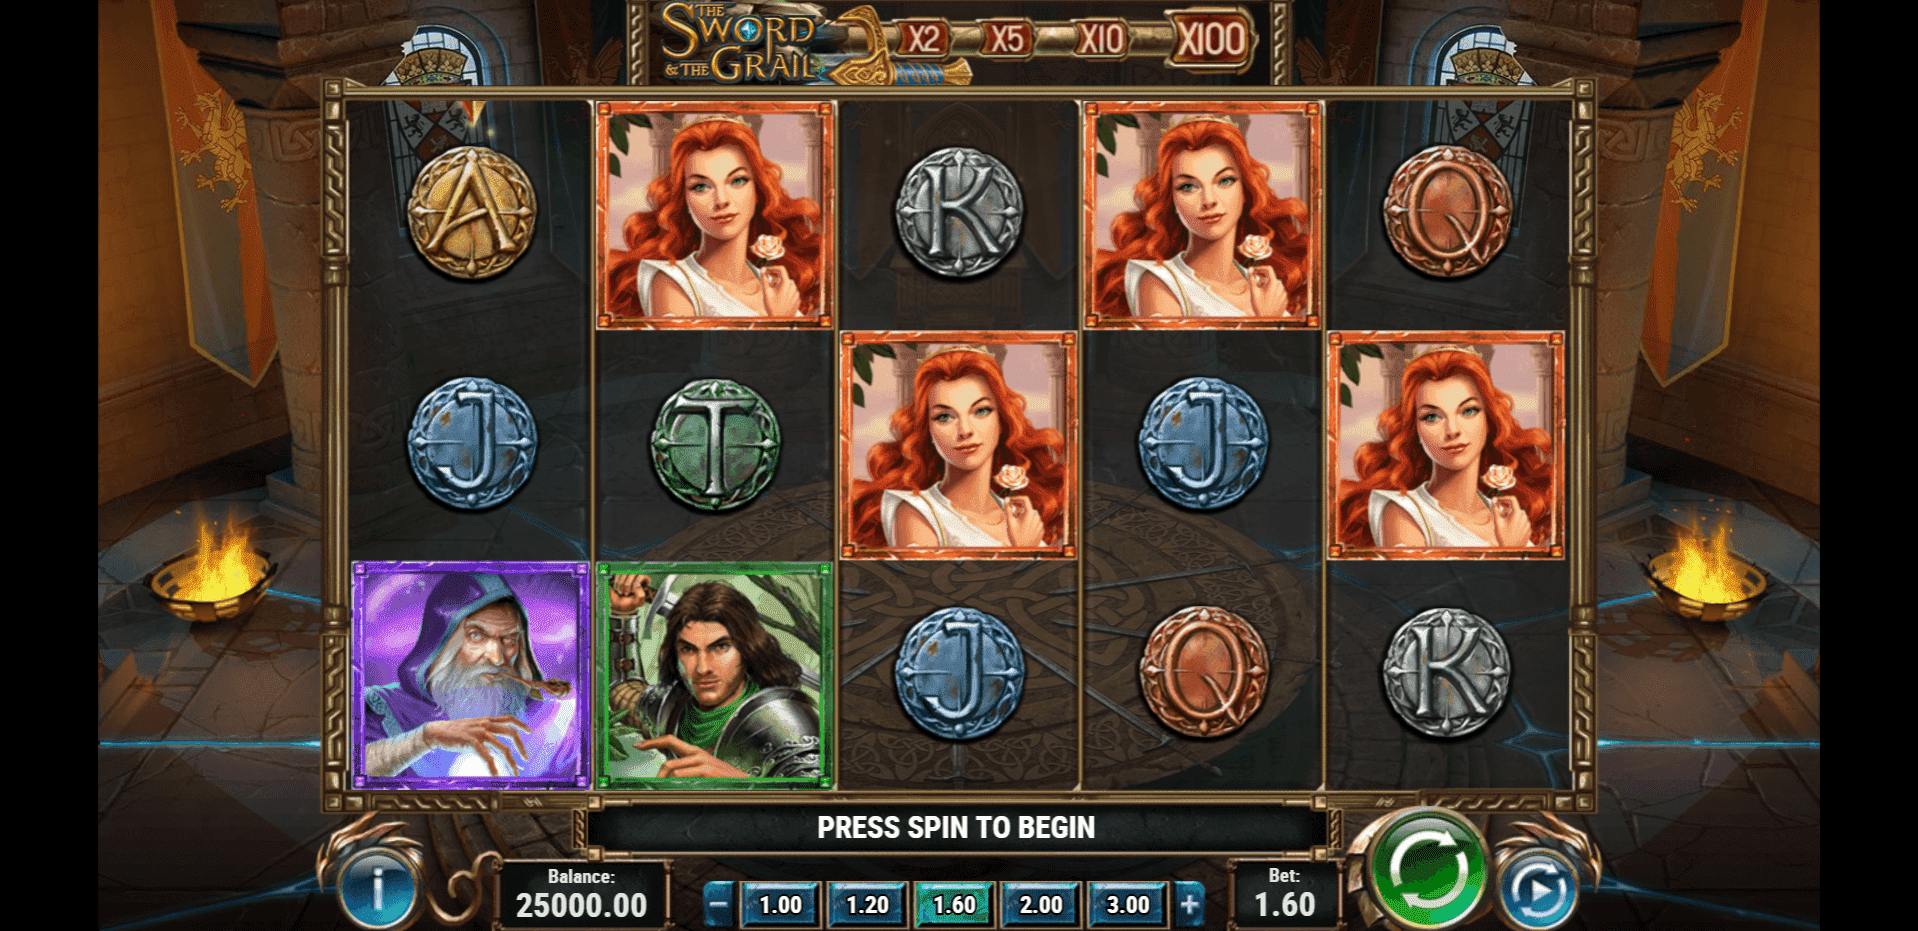 The Sword and The Grail slot play free